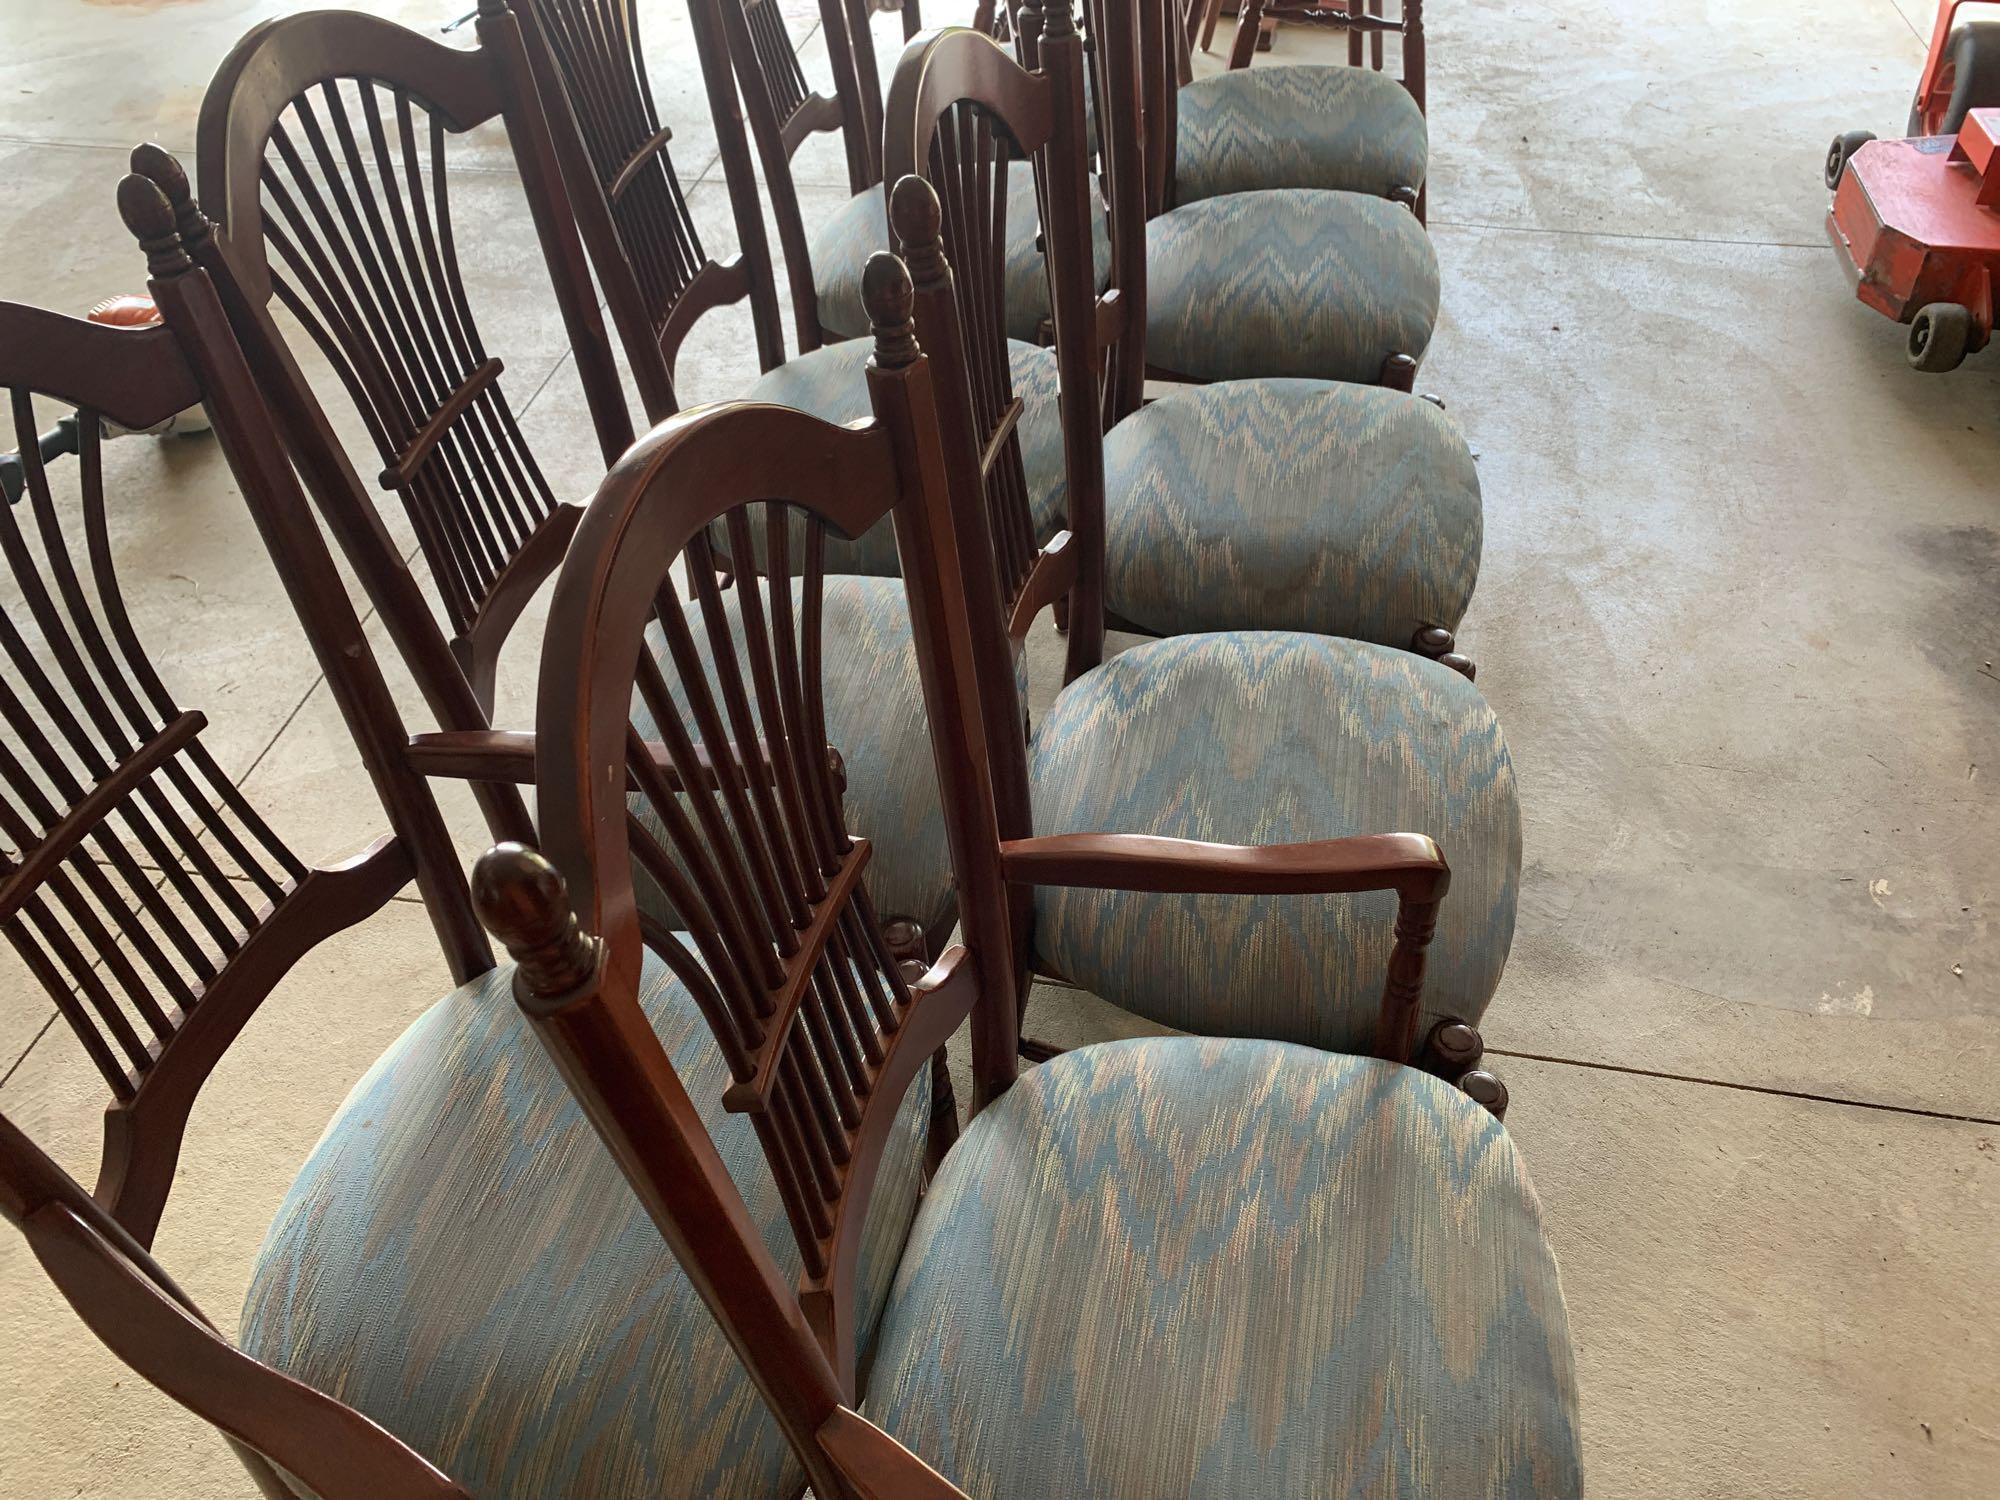 Cherry Dinning Table (12) Upholstered cherry dining chairs